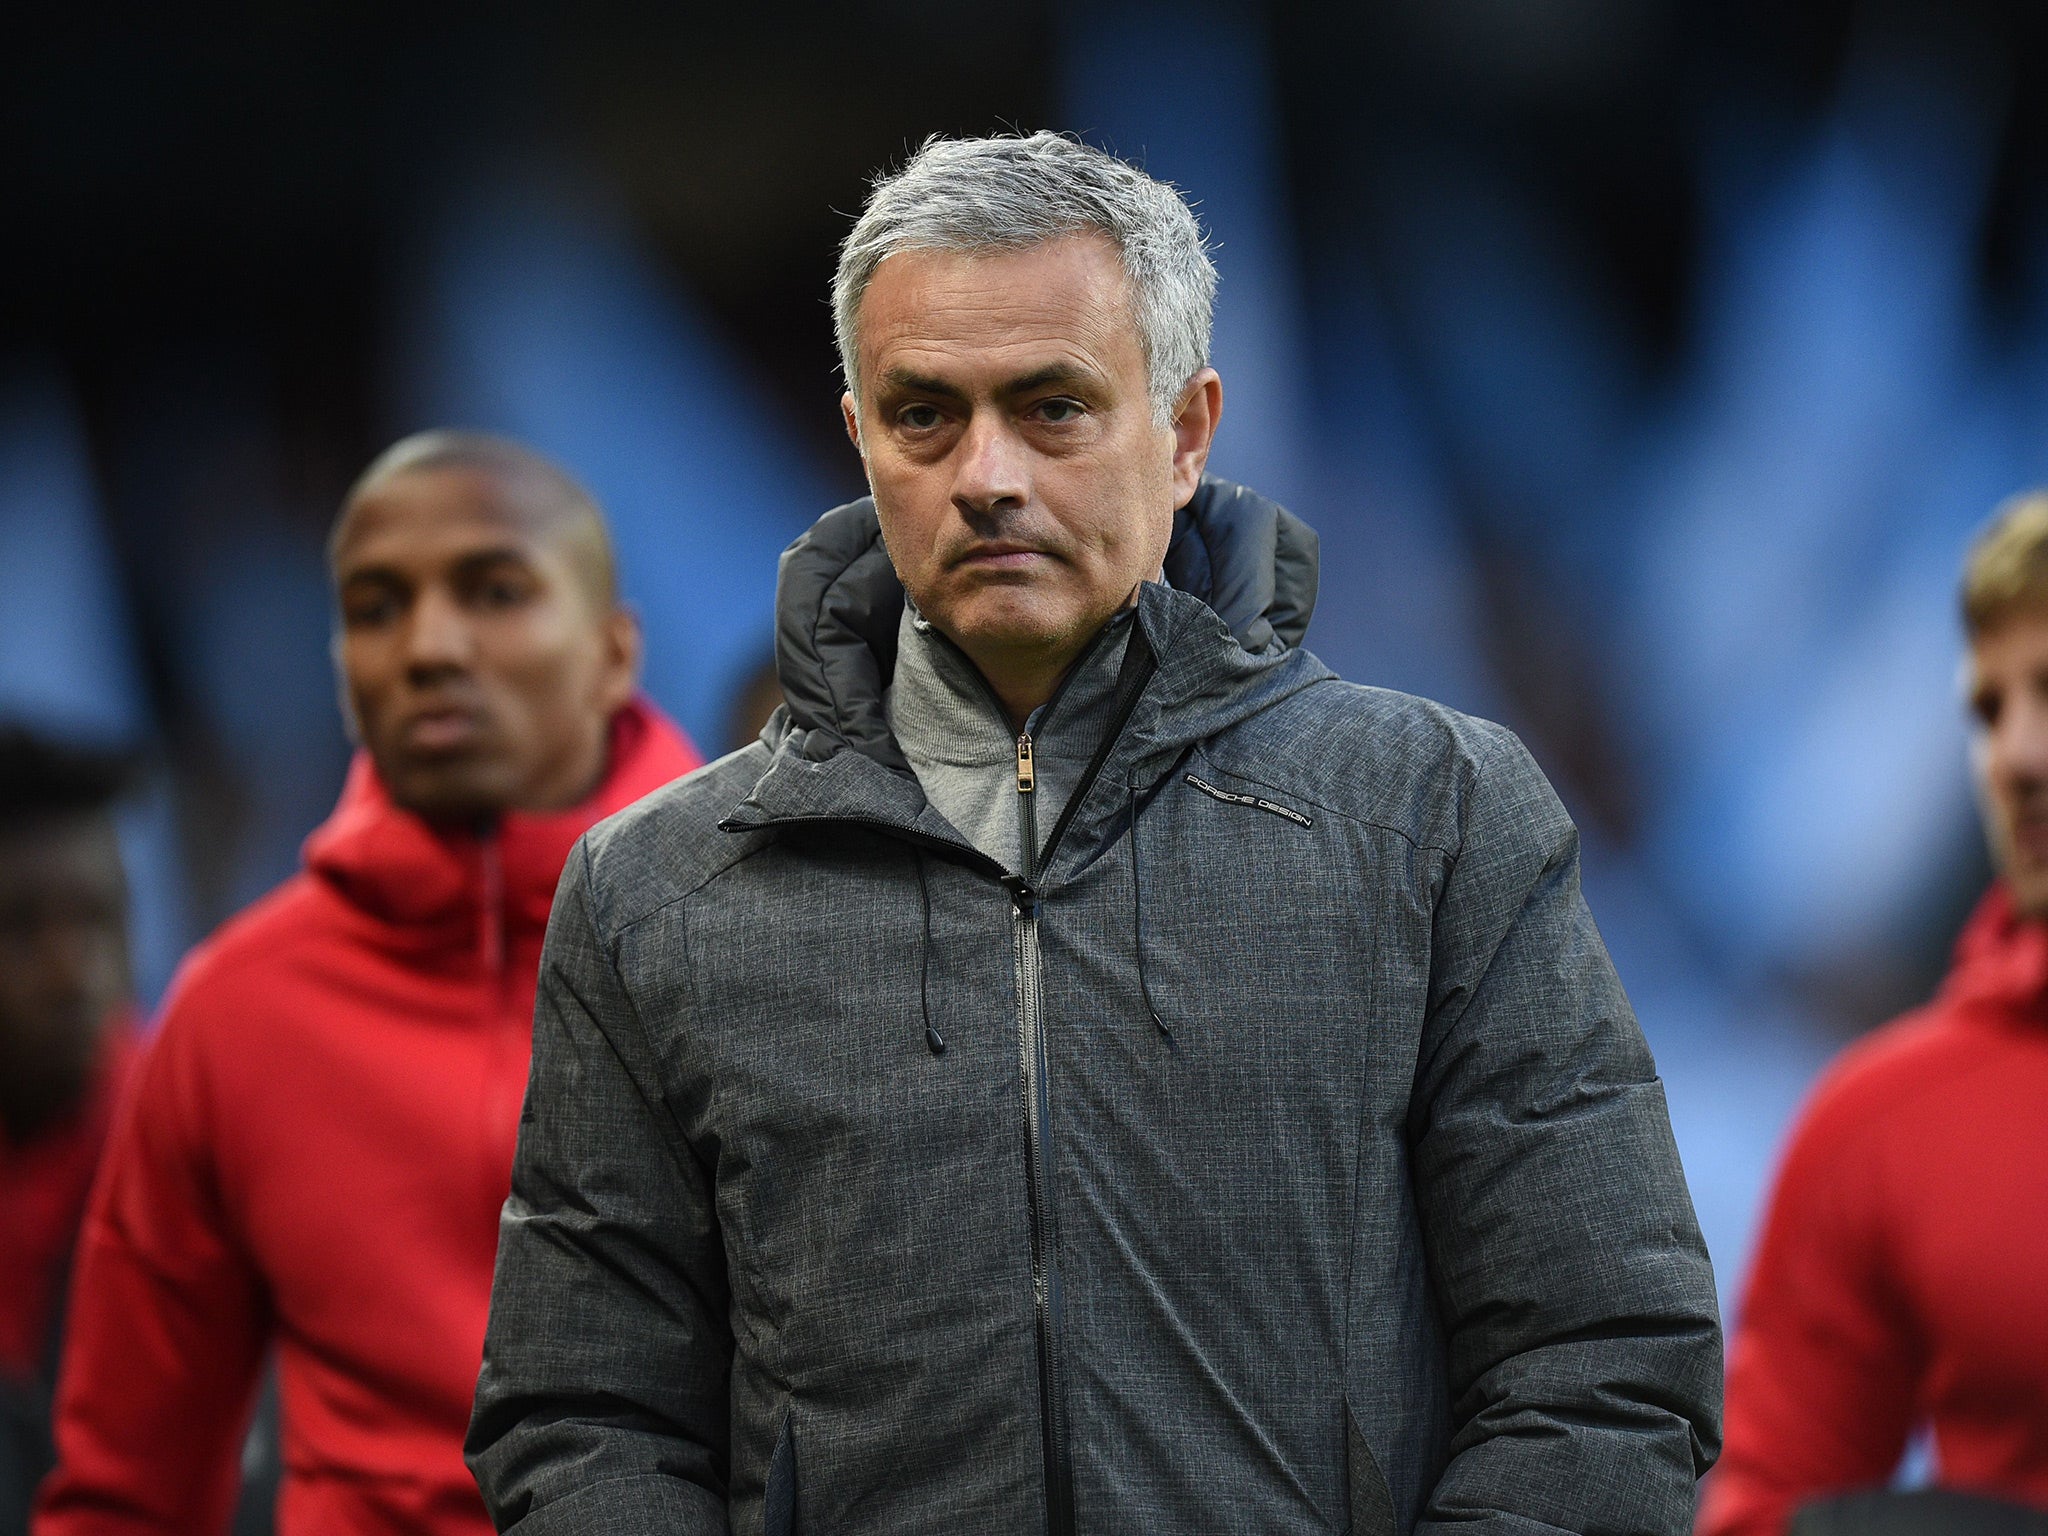 Jose Mourinho believes he has brought a sense of belief back to Manchester United